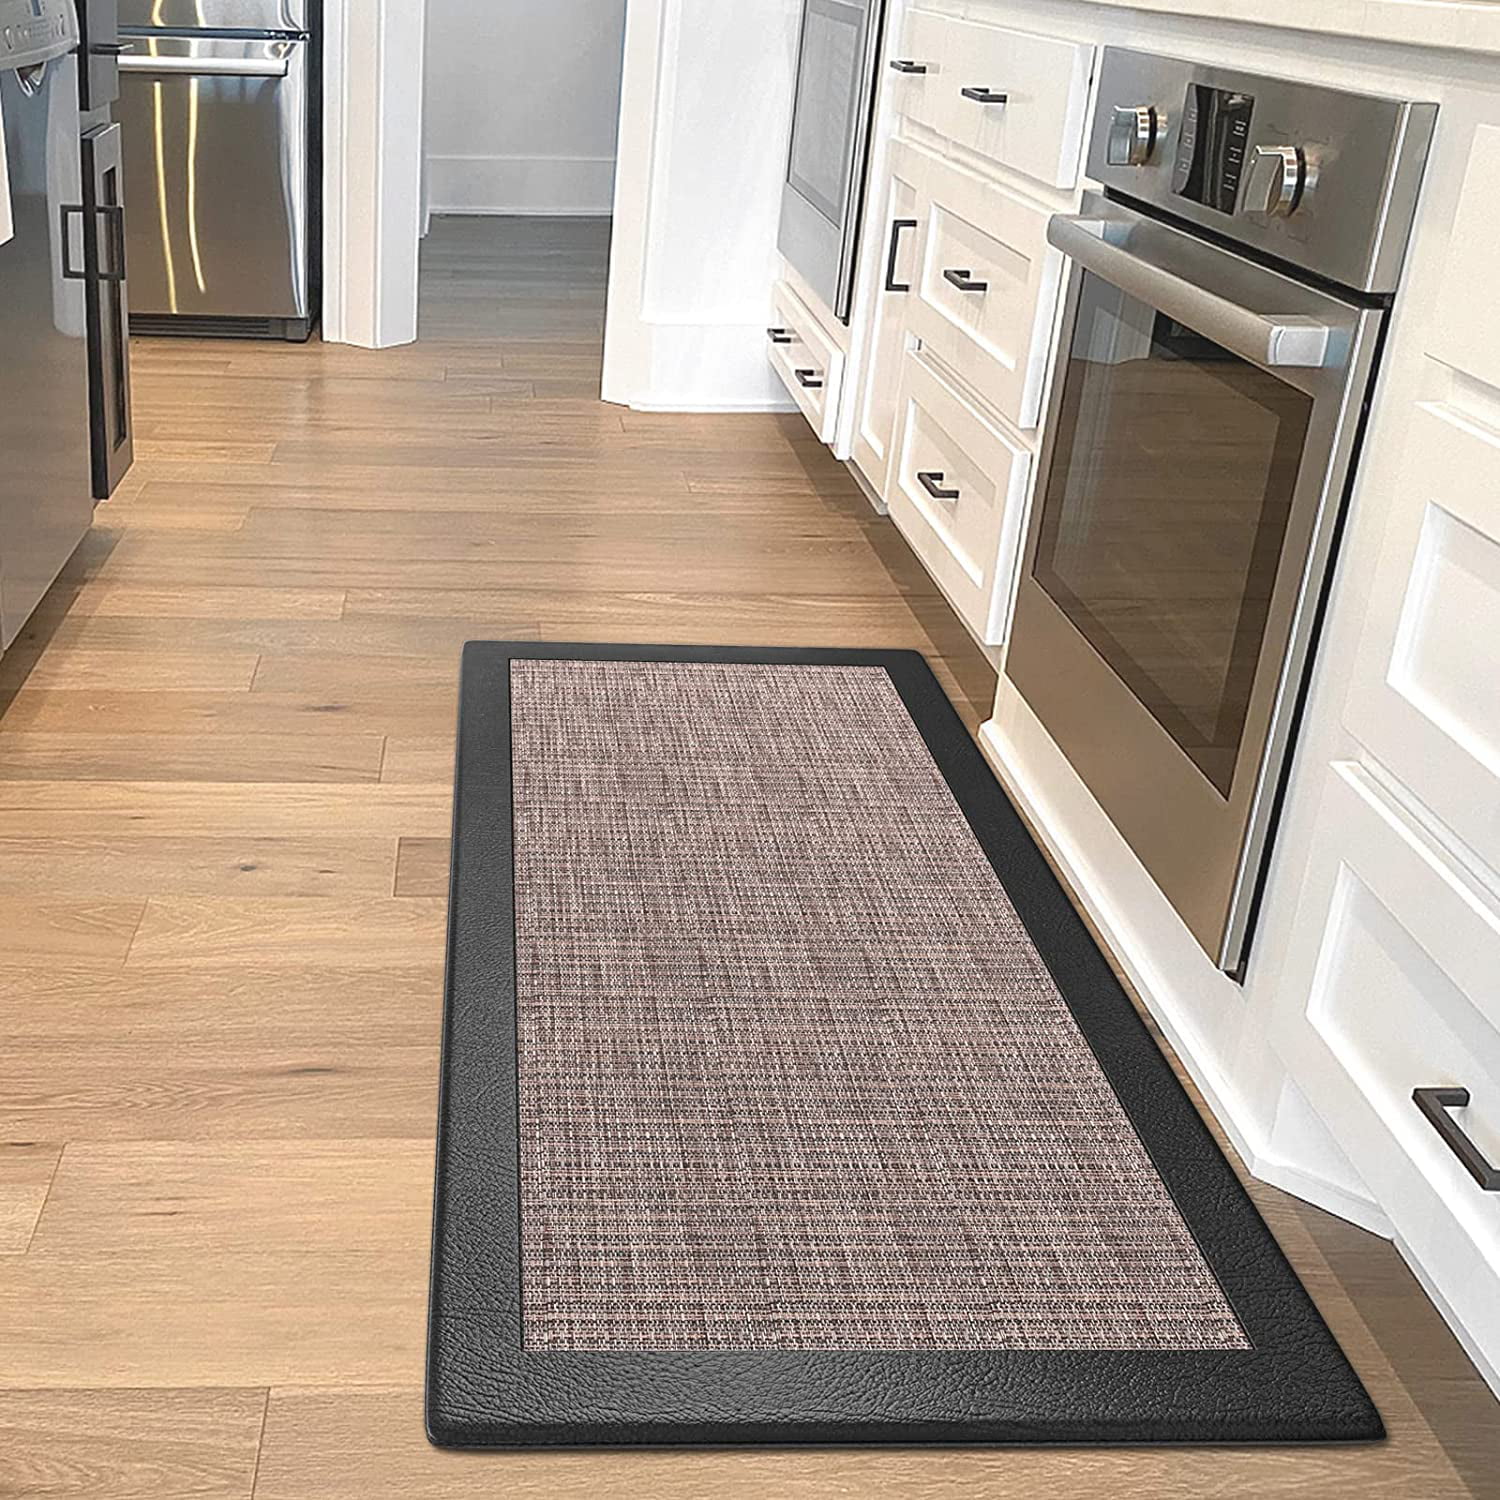 Easy-care Anti-fatigue Non-skid Comfort Floor Mat Rug Kitchen Bless This Home 